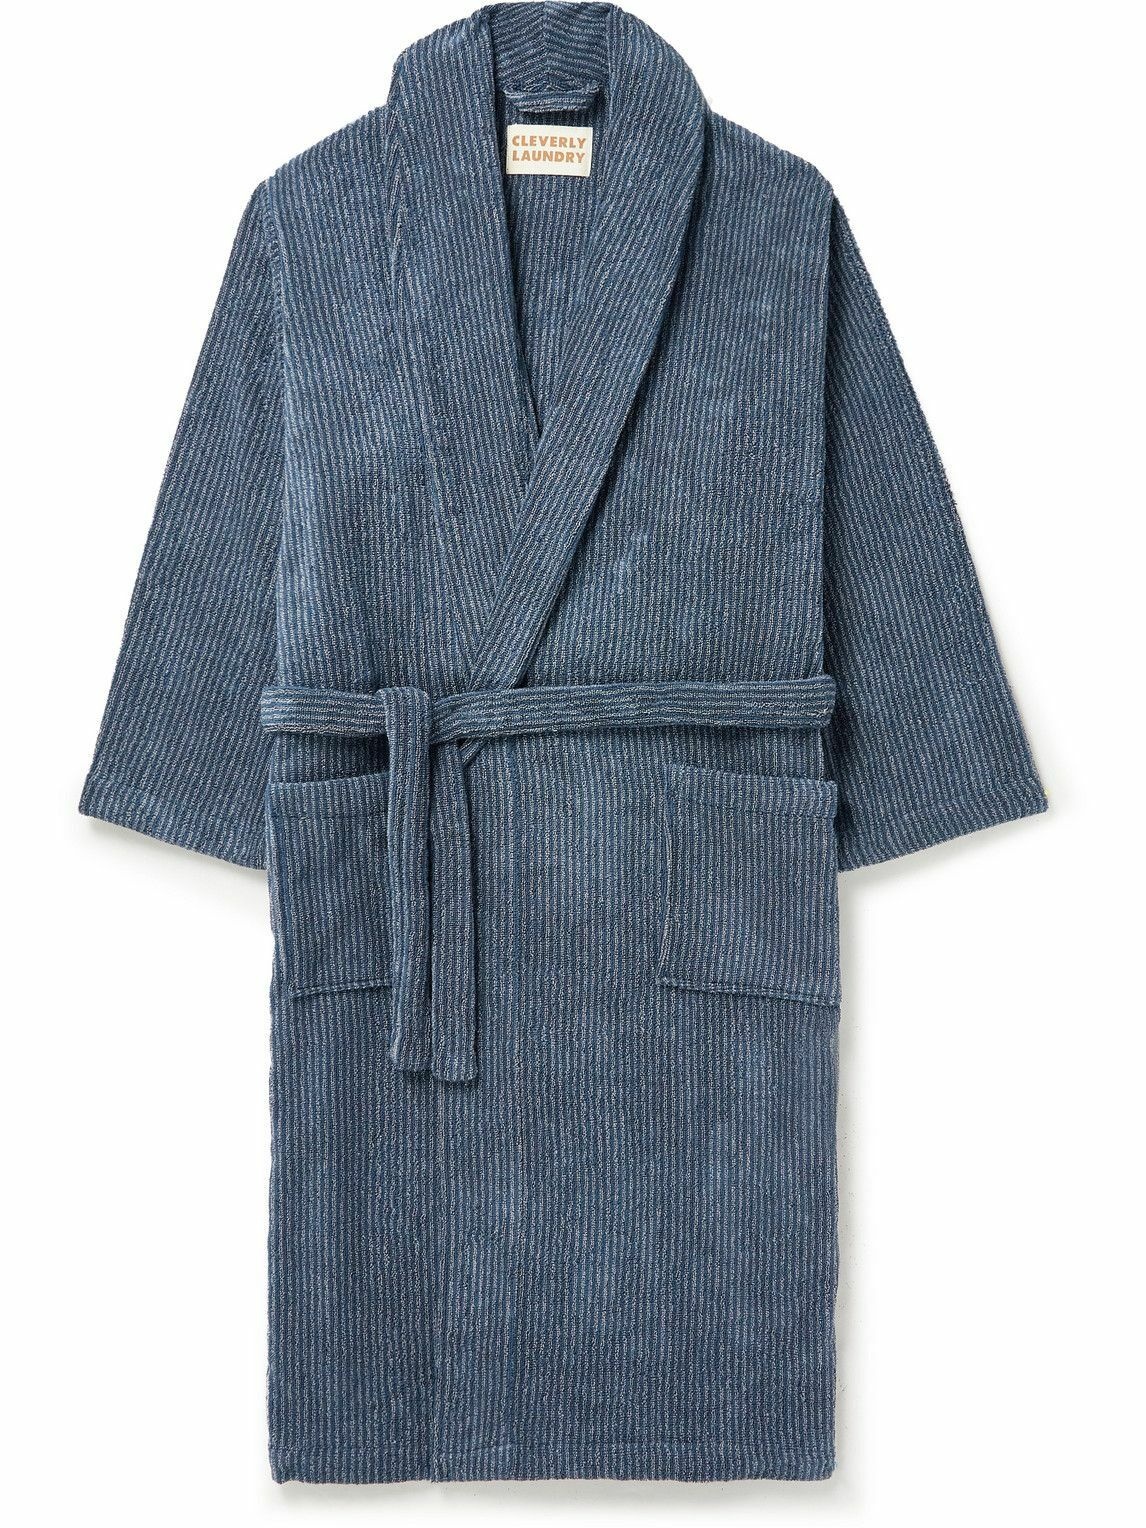 Photo: Cleverly Laundry - Striped Cotton-Terry Robe - Blue